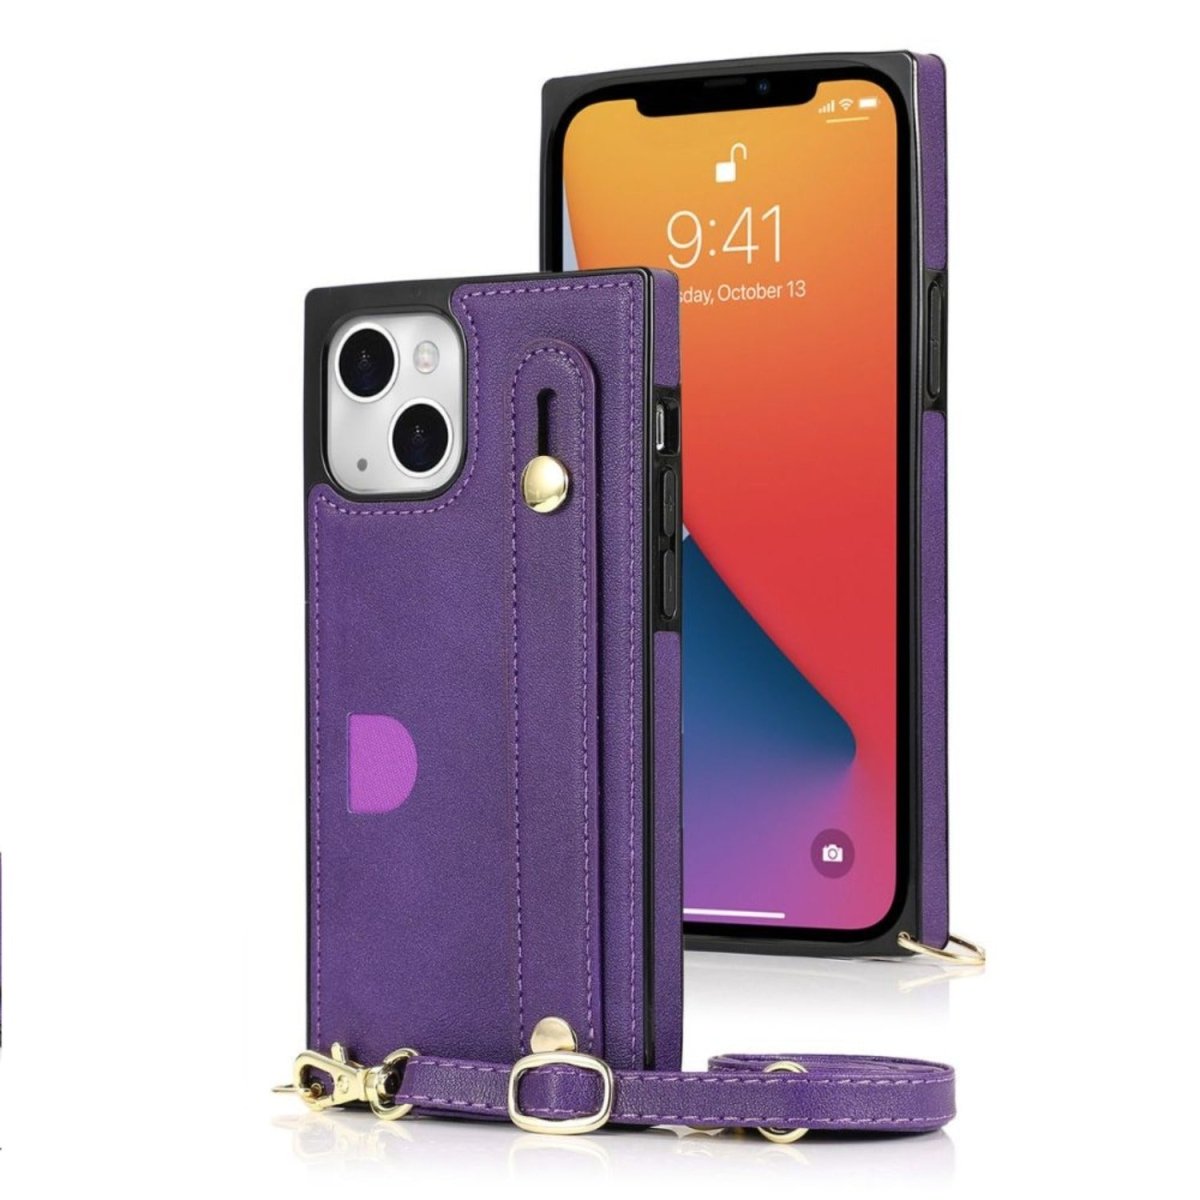 Nox Slim Leather Shockproof iPhone Case With Wrist Strap